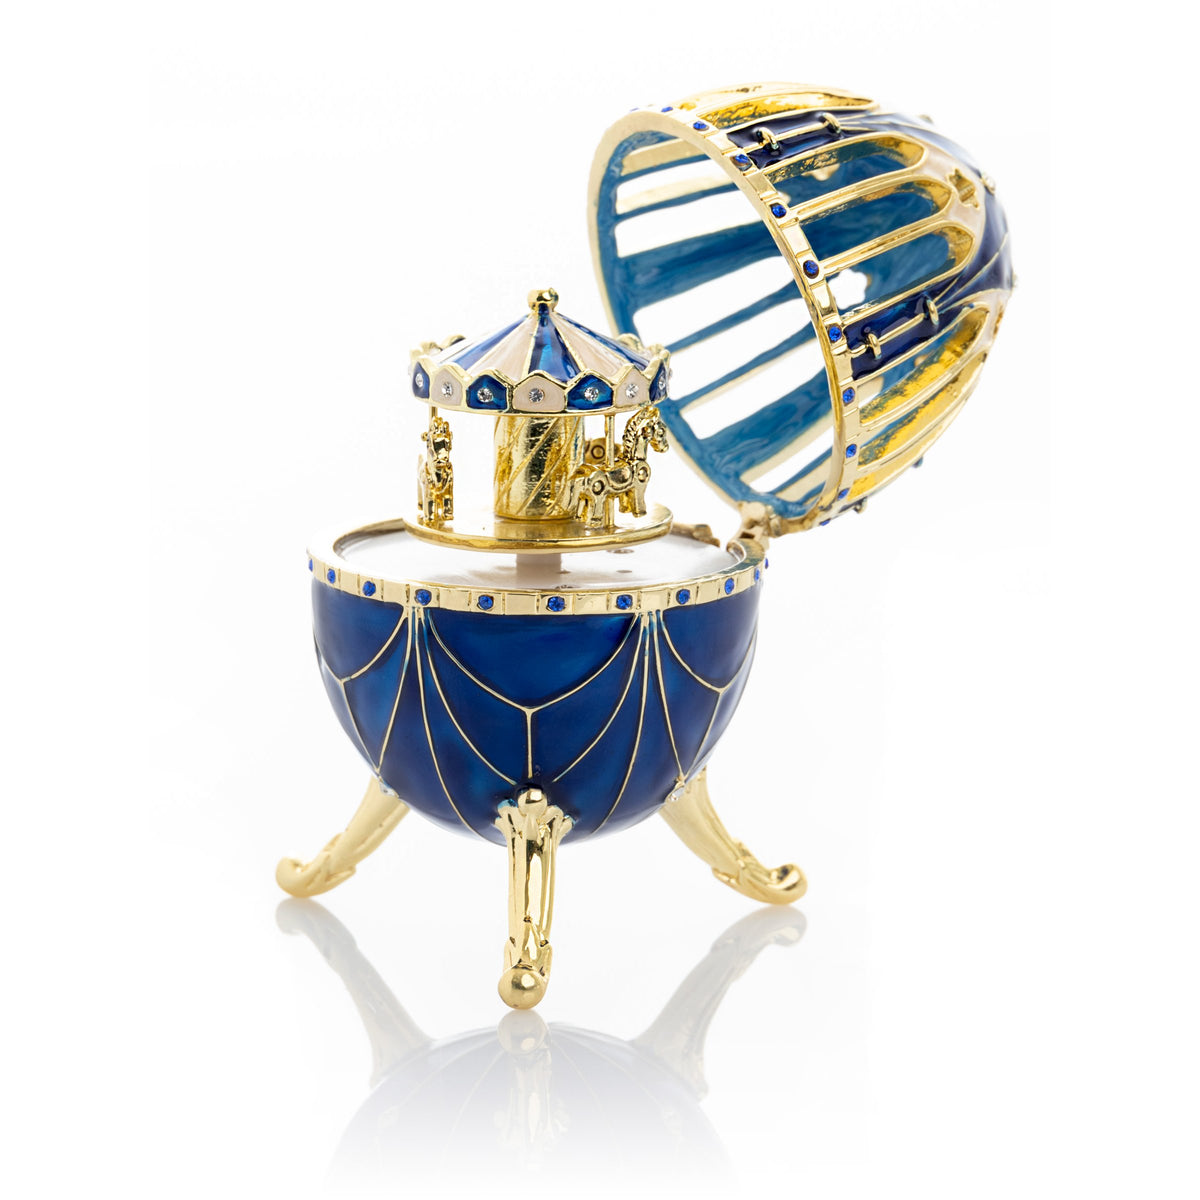 Blue and Gold Faberge Egg with Horse Carousel Surprise Inside